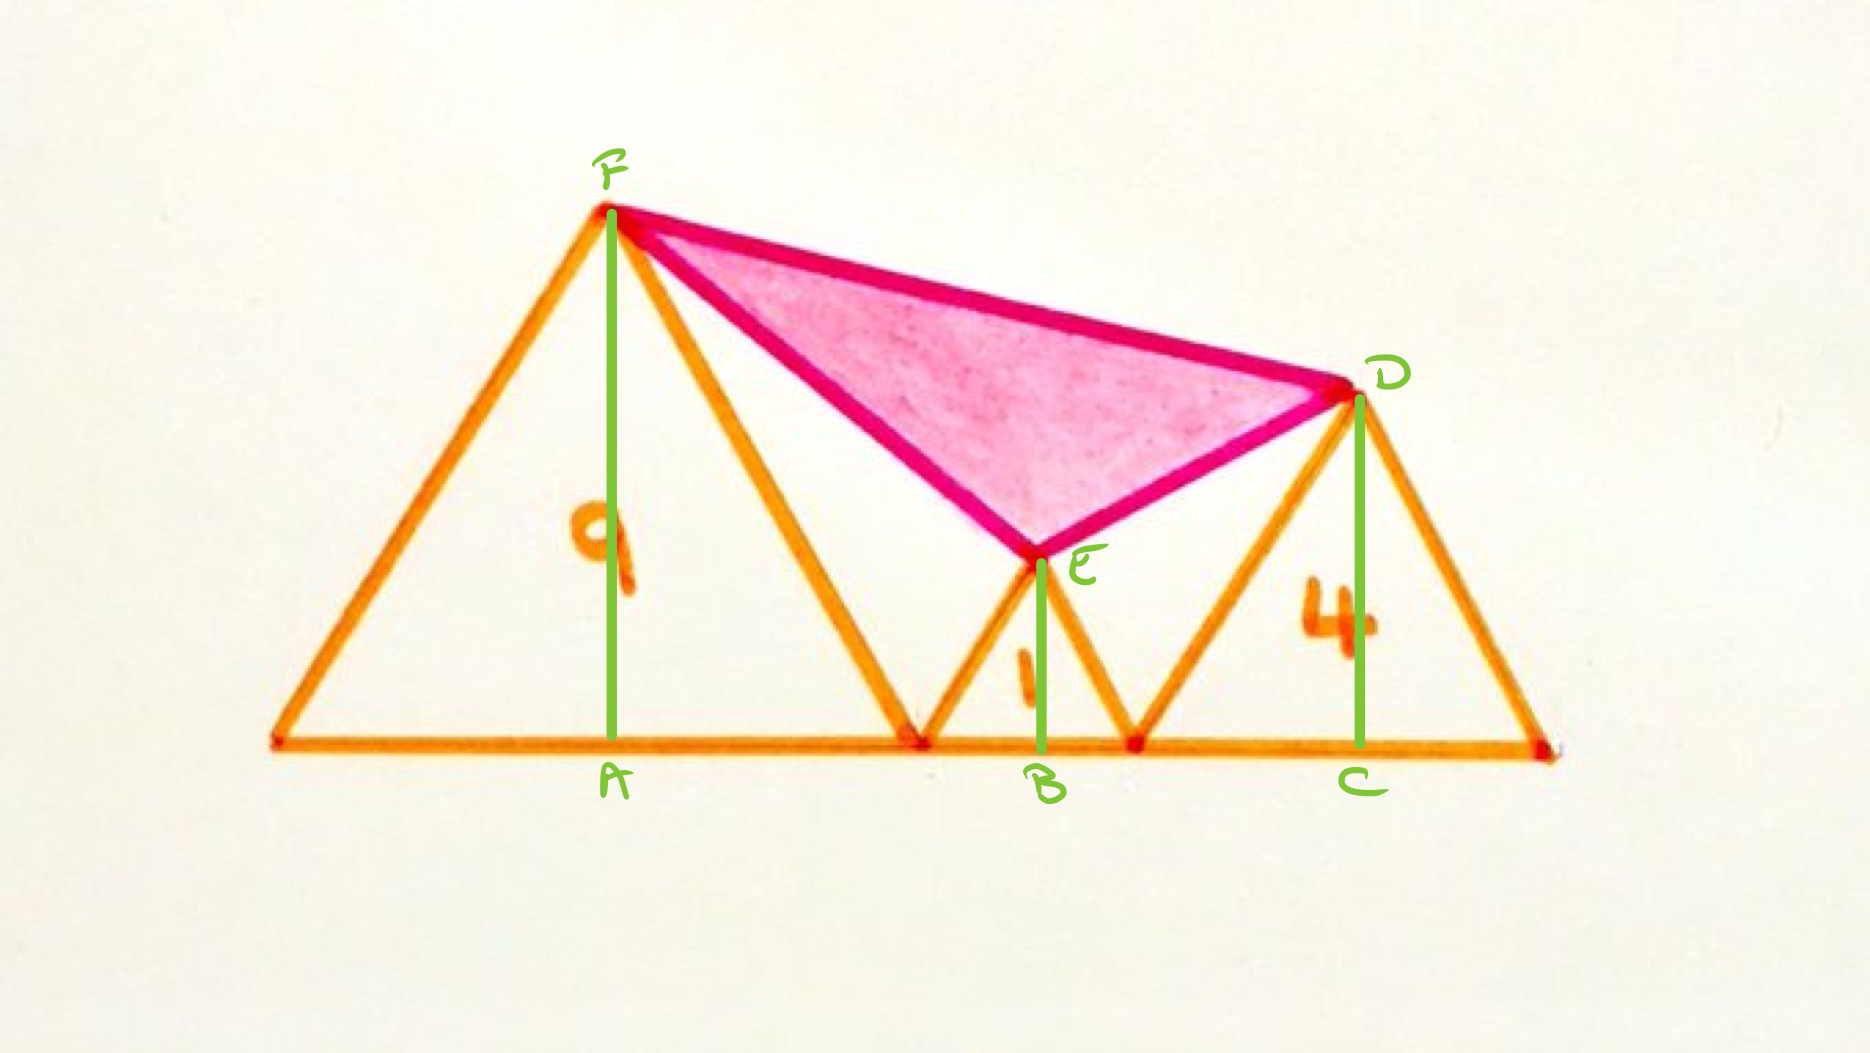 Three aligned triangles labelled